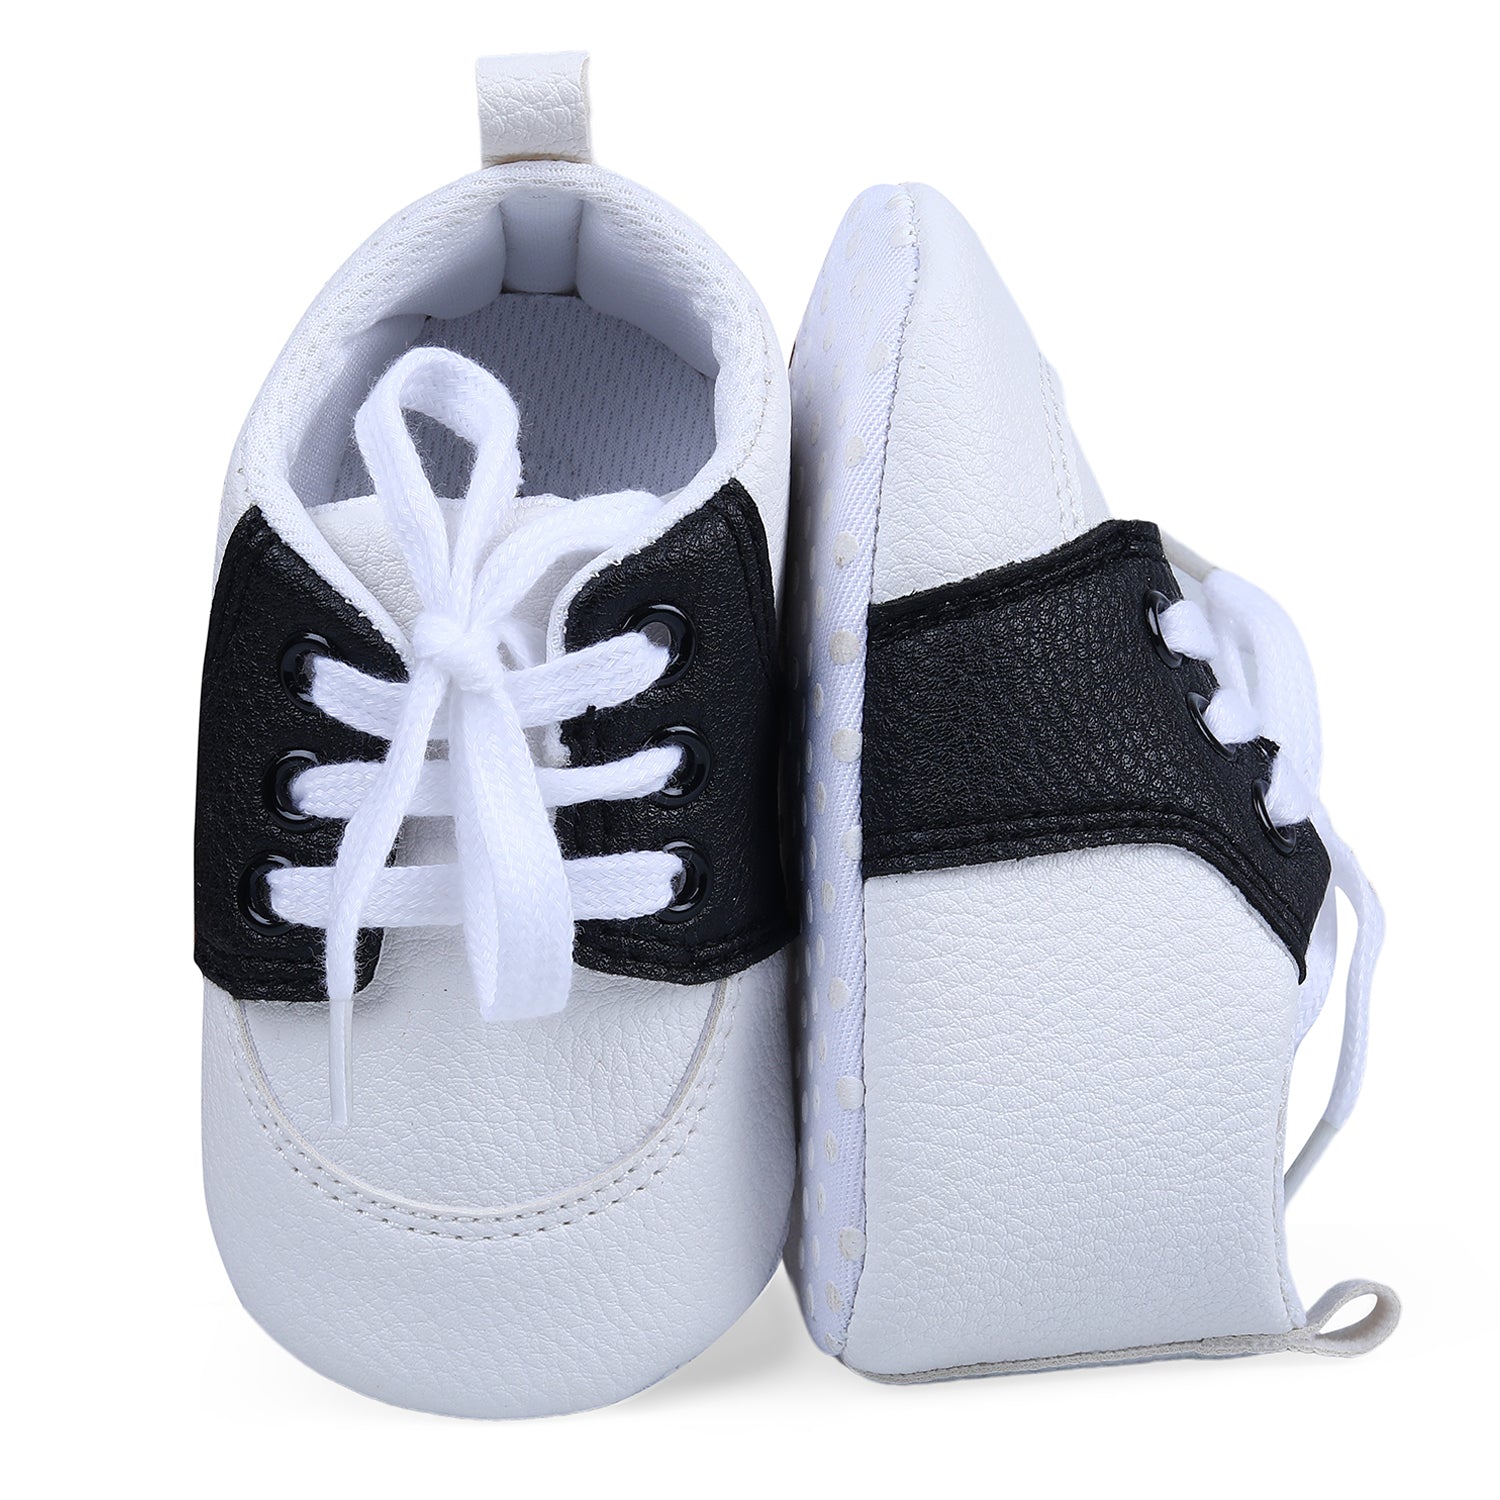 Lace-Up Stylish Leather Sneaker Shoes - Black - Baby Moo